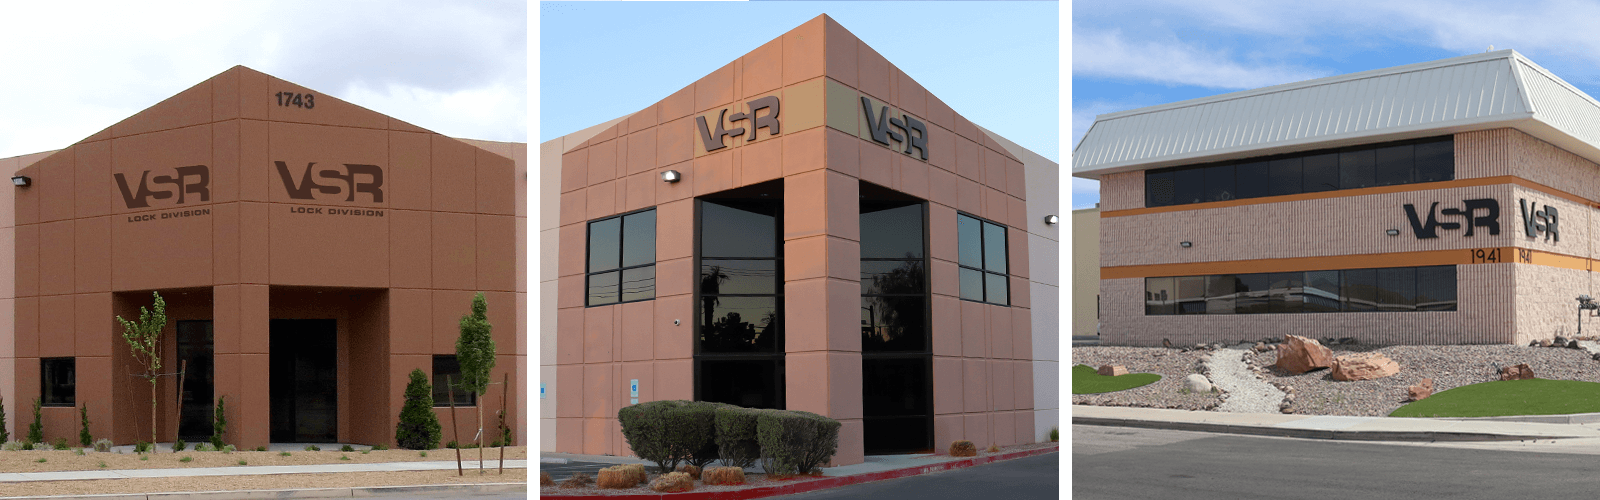 VSR Industries - About Us